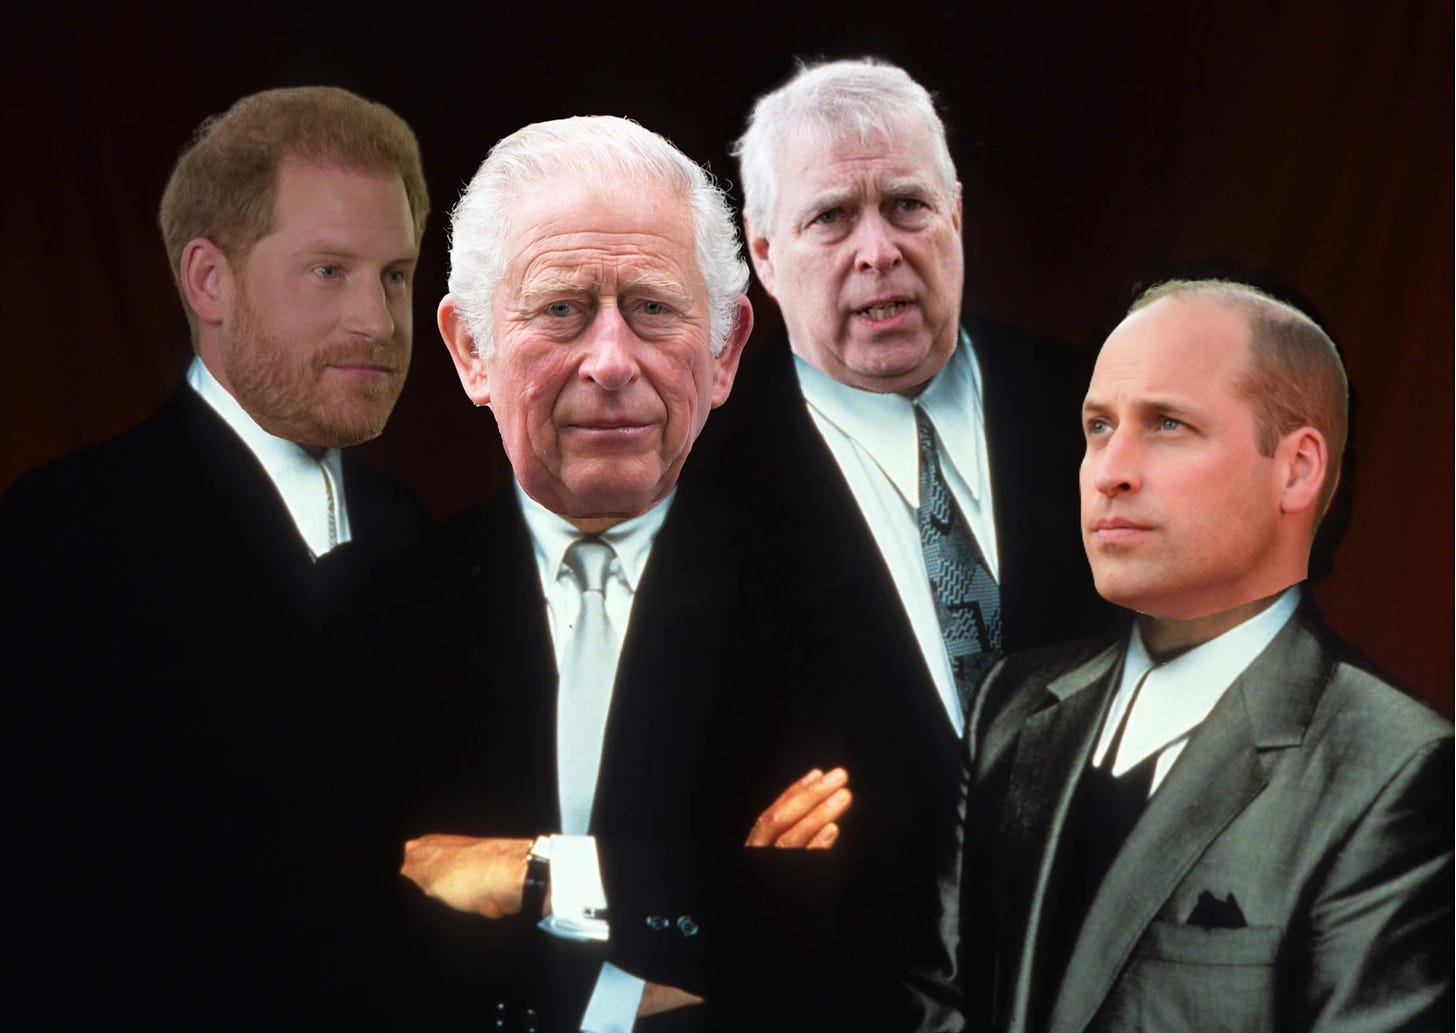 Goodfellas but the characters are replaced with Harry, King Charles, Andrew and William